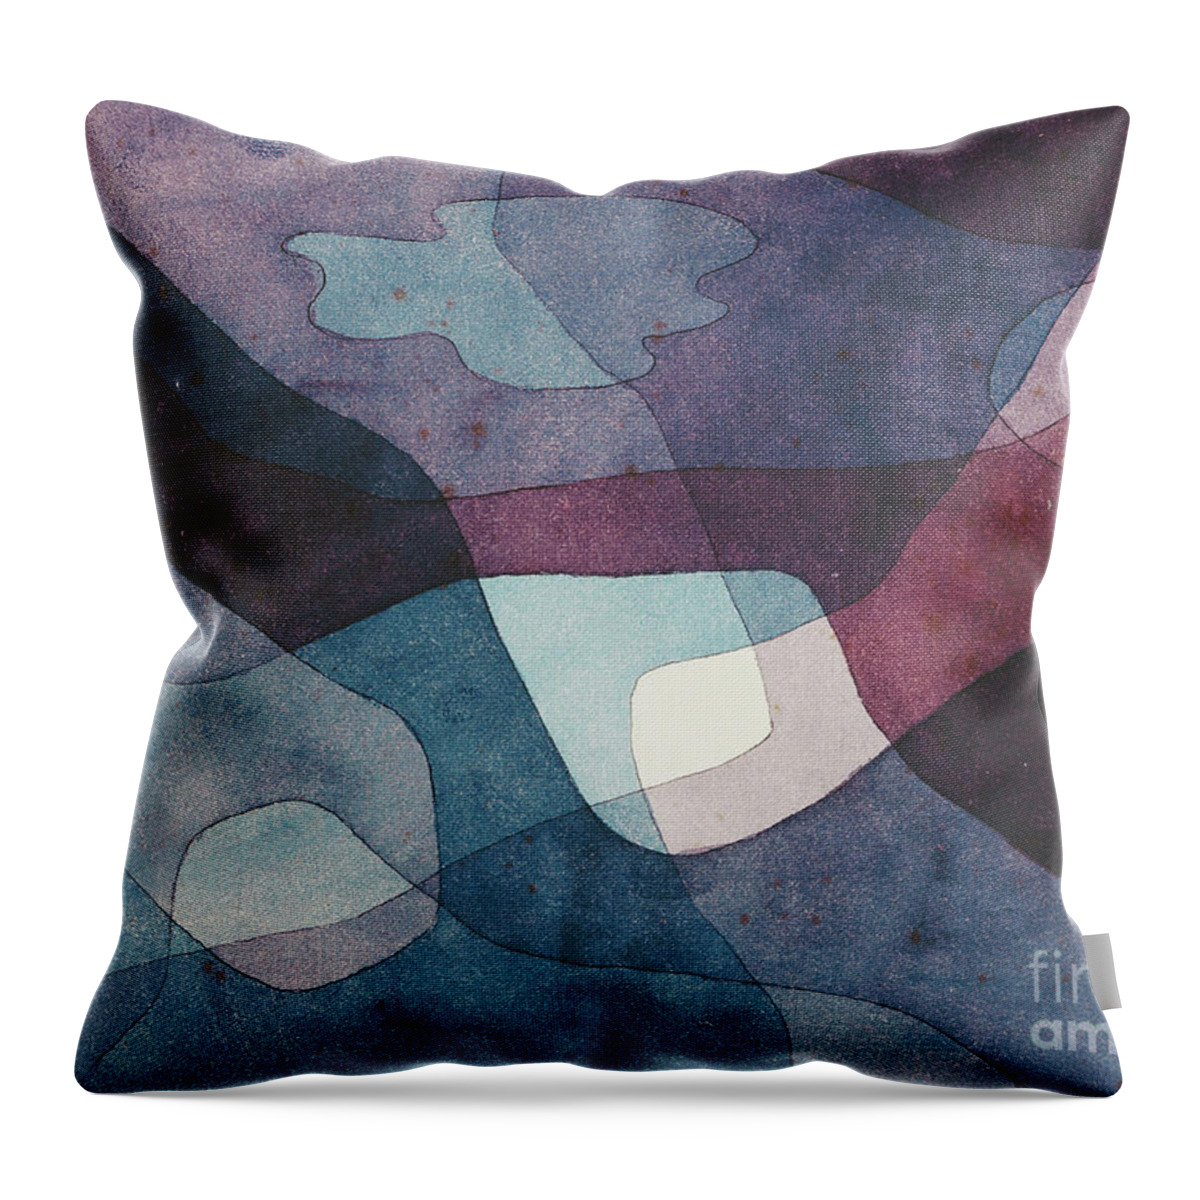 Paul Throw Pillow featuring the painting Mountain And Synthetic Air; Berg Und Luft Synthetisch, 1930 Watercolour On Paper On Artists Mount by Paul Klee